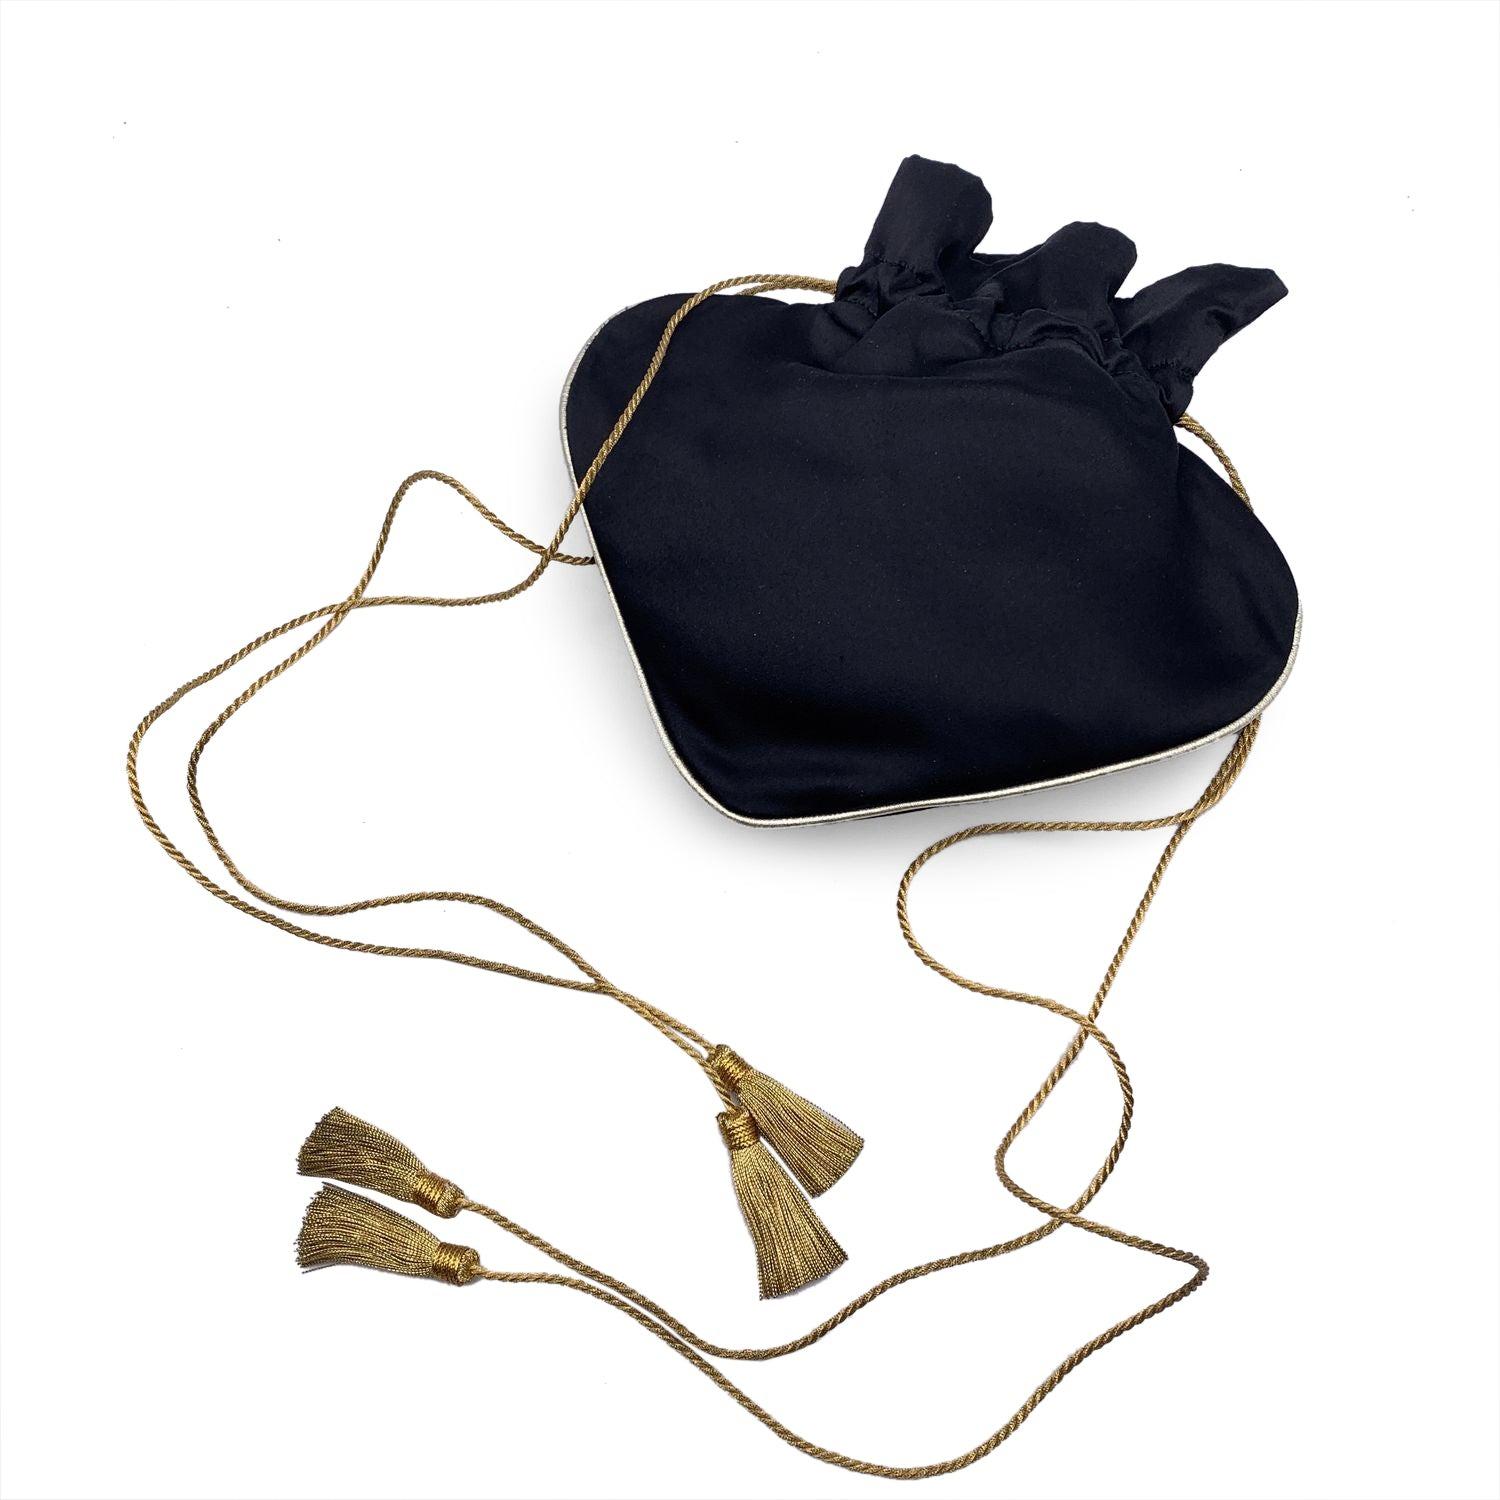 Gorgeous vintage rare small drawstring evening bag by Yves Saint Laurent. In black satin with gold metal trim, the bag features a fancy ace of spades shape. Drawstring closure. Black internal lining. Adjustable shoulder strap. Tassel detailing on